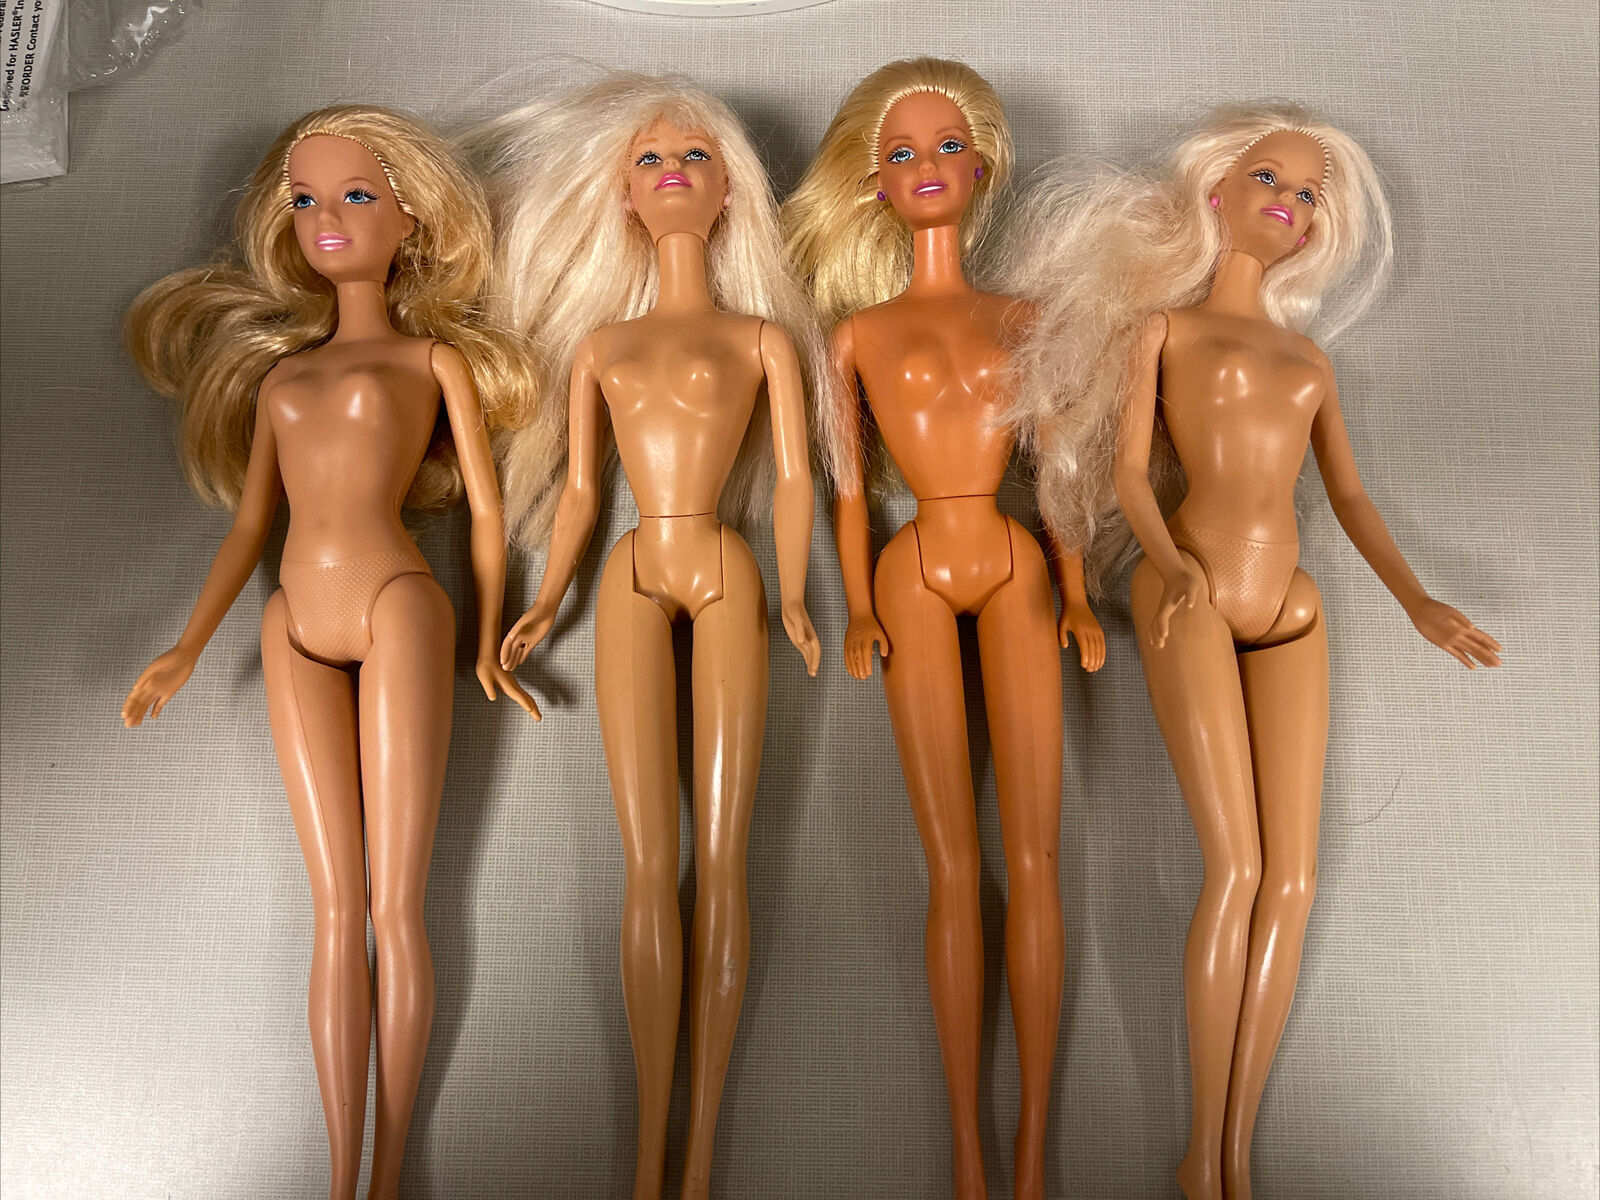 Lot Of 4 1990's Blonde Barbies, Very Nice Condition